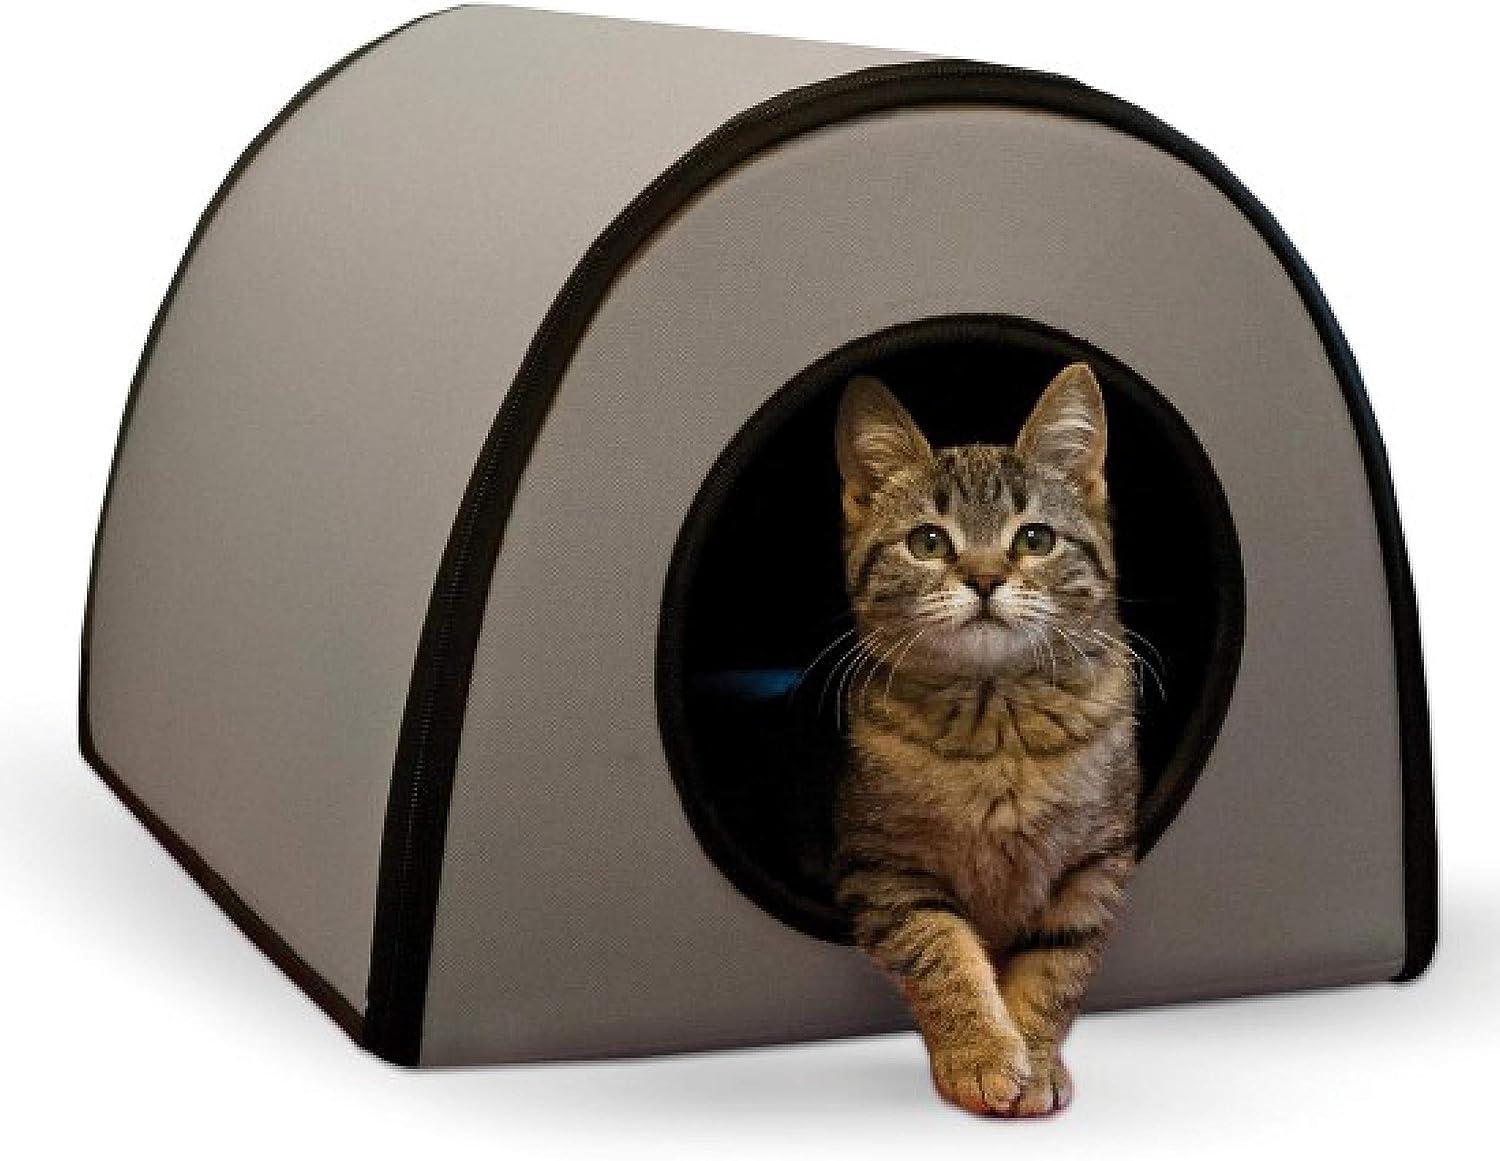 KH Pet Products Thermo Mod Kitty Shelter Heated Cat House for $37.65 Shipped